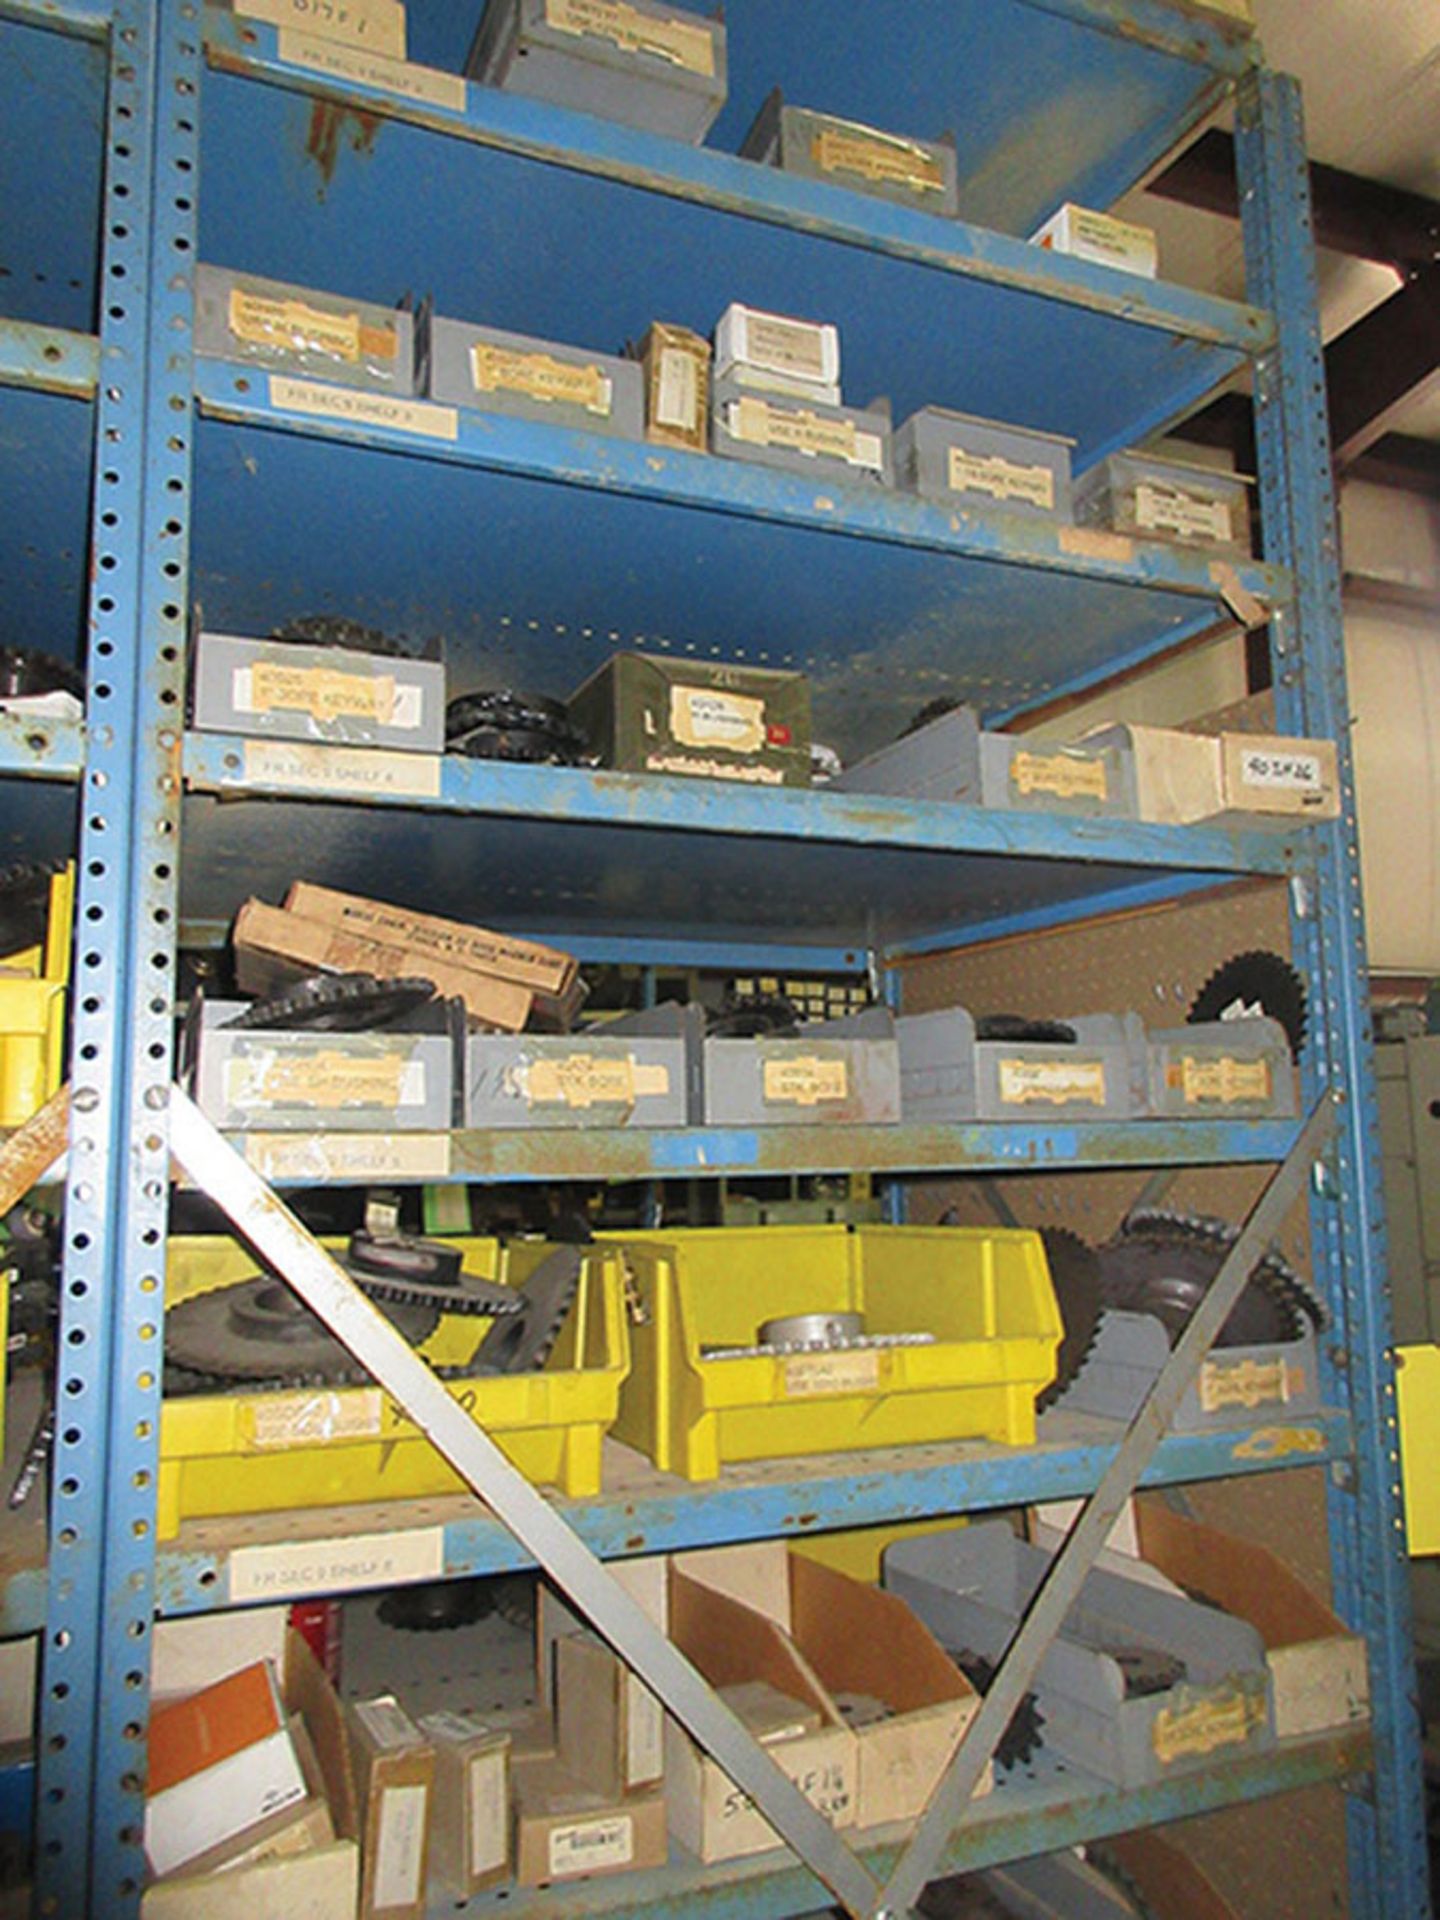 CONTENTS OF (1) SIDE, (5) SECTIONS OF SHELF UNIT: LARGE QUANTITY OF SOCKETS - MANY SIZES; BUSSMAN - Image 10 of 10